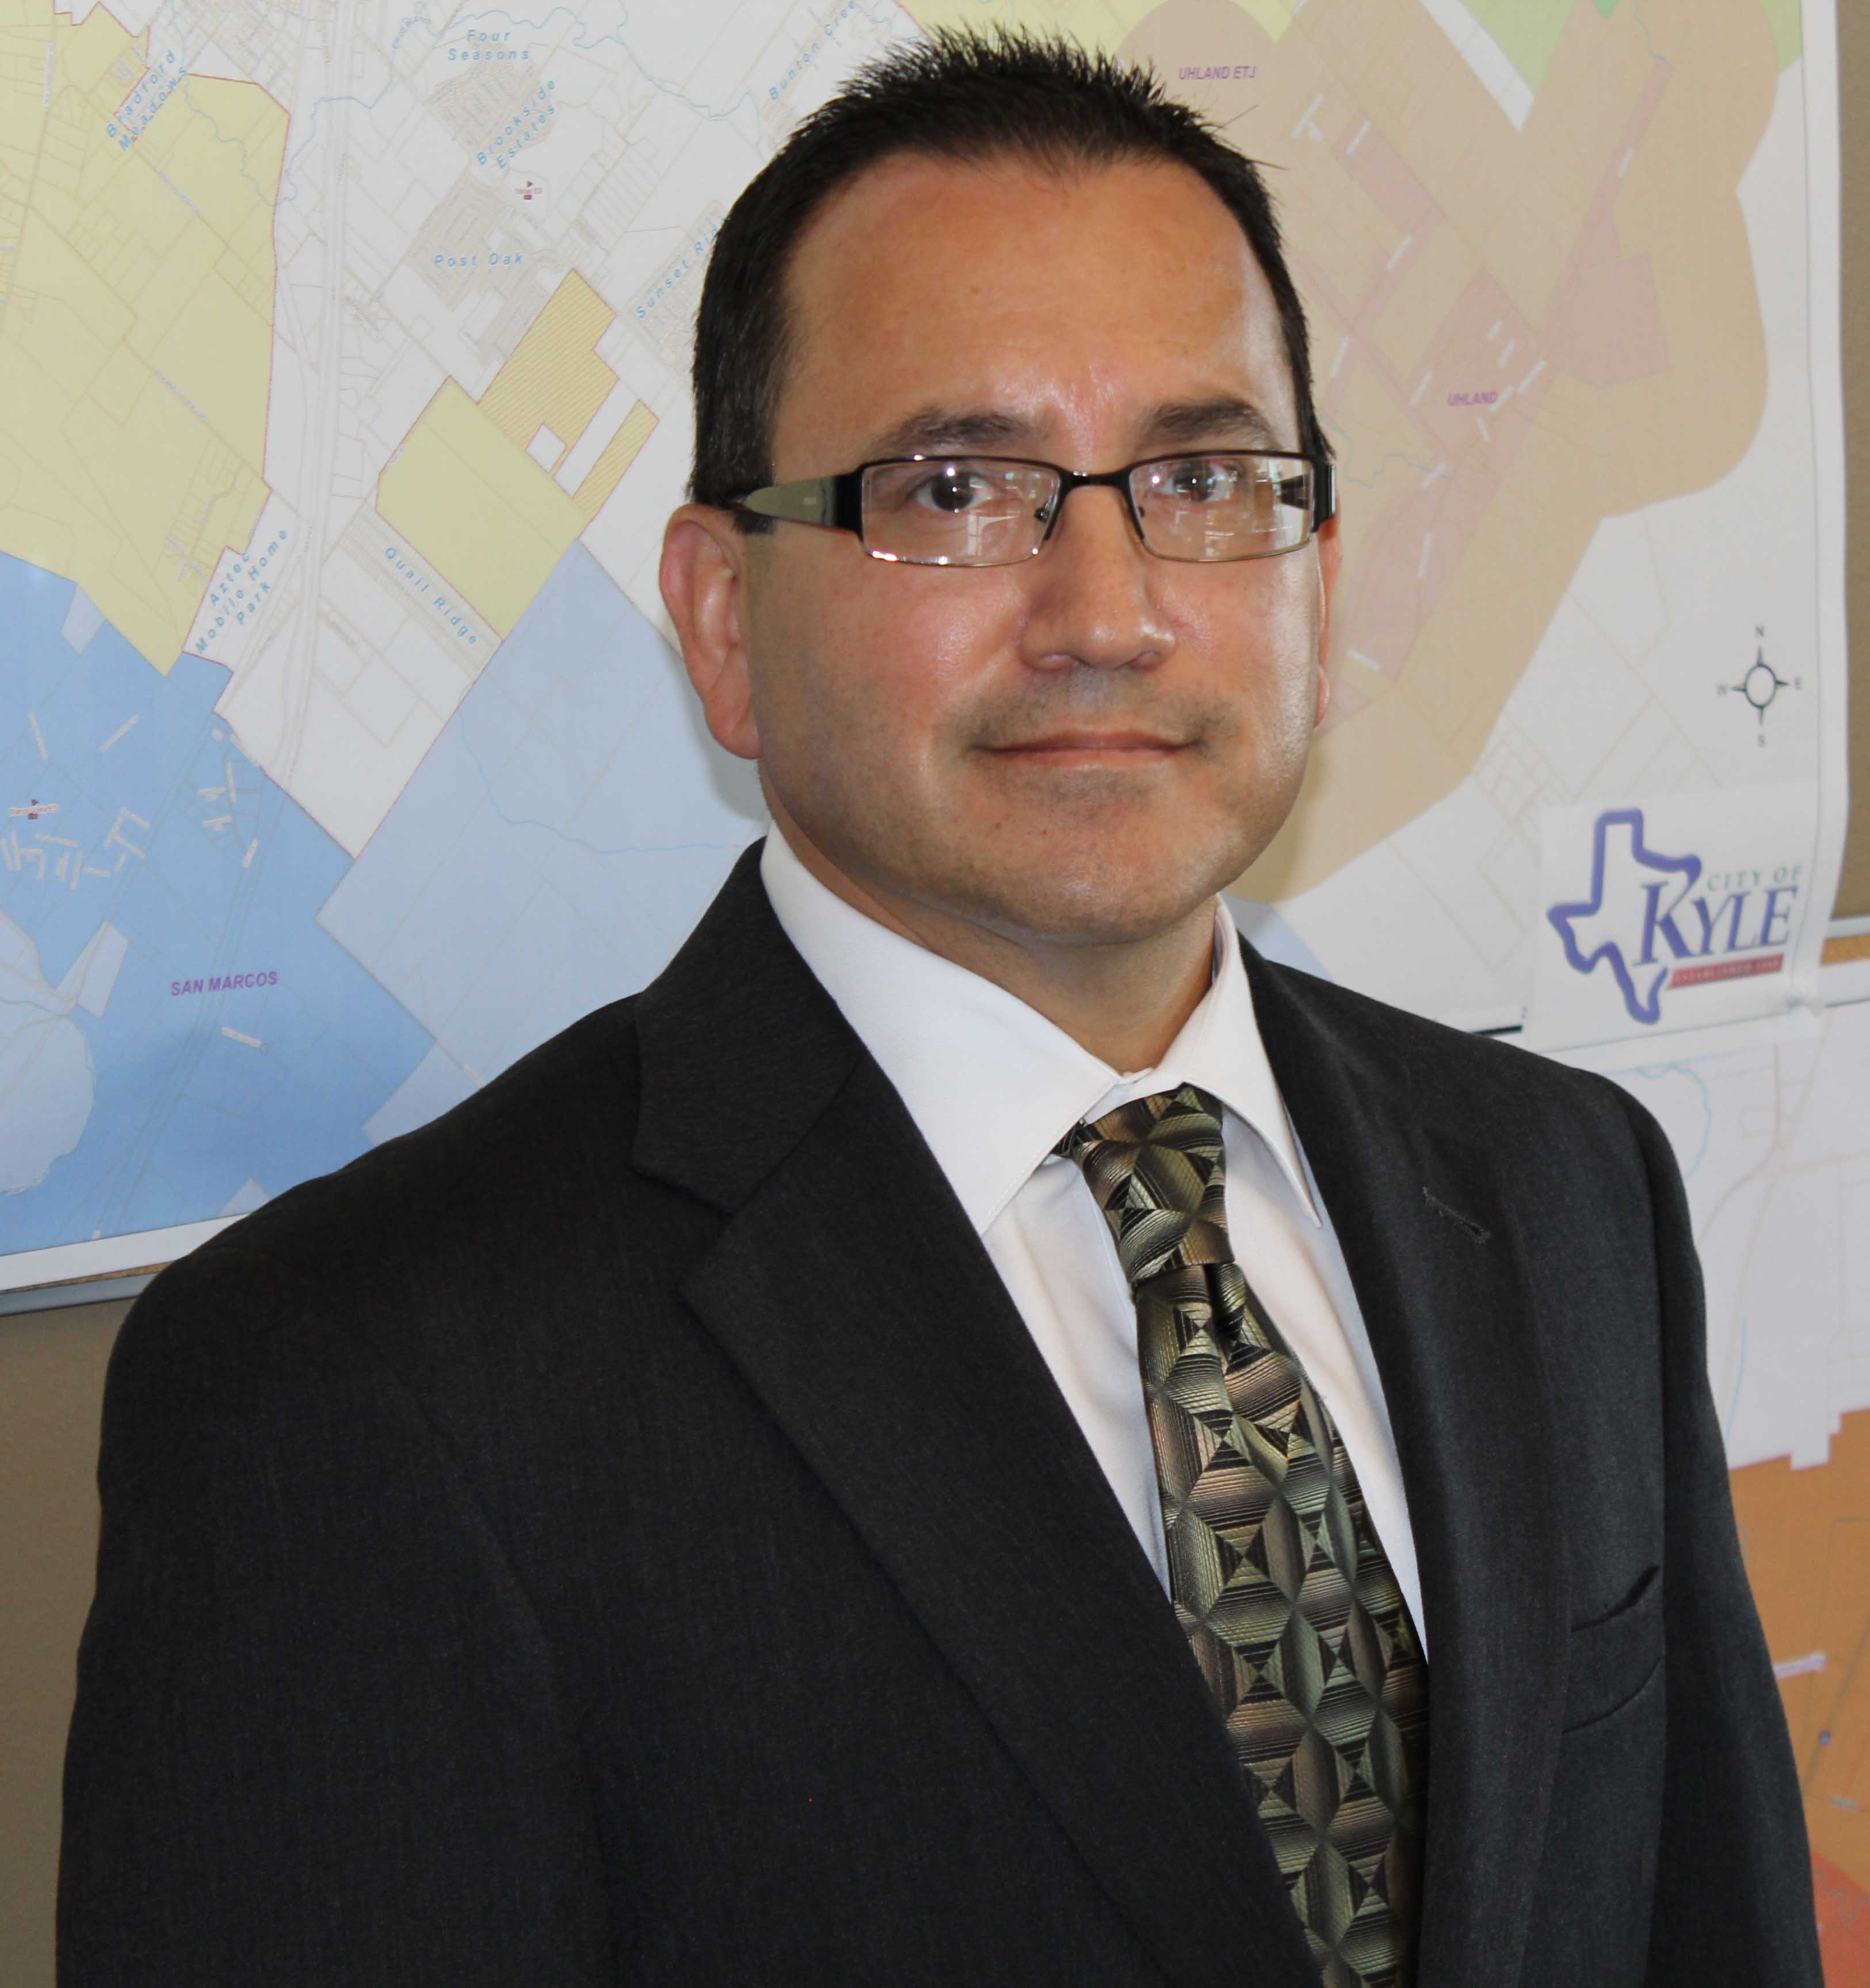 New Director of Planning Brings Wide Range of Experience to City